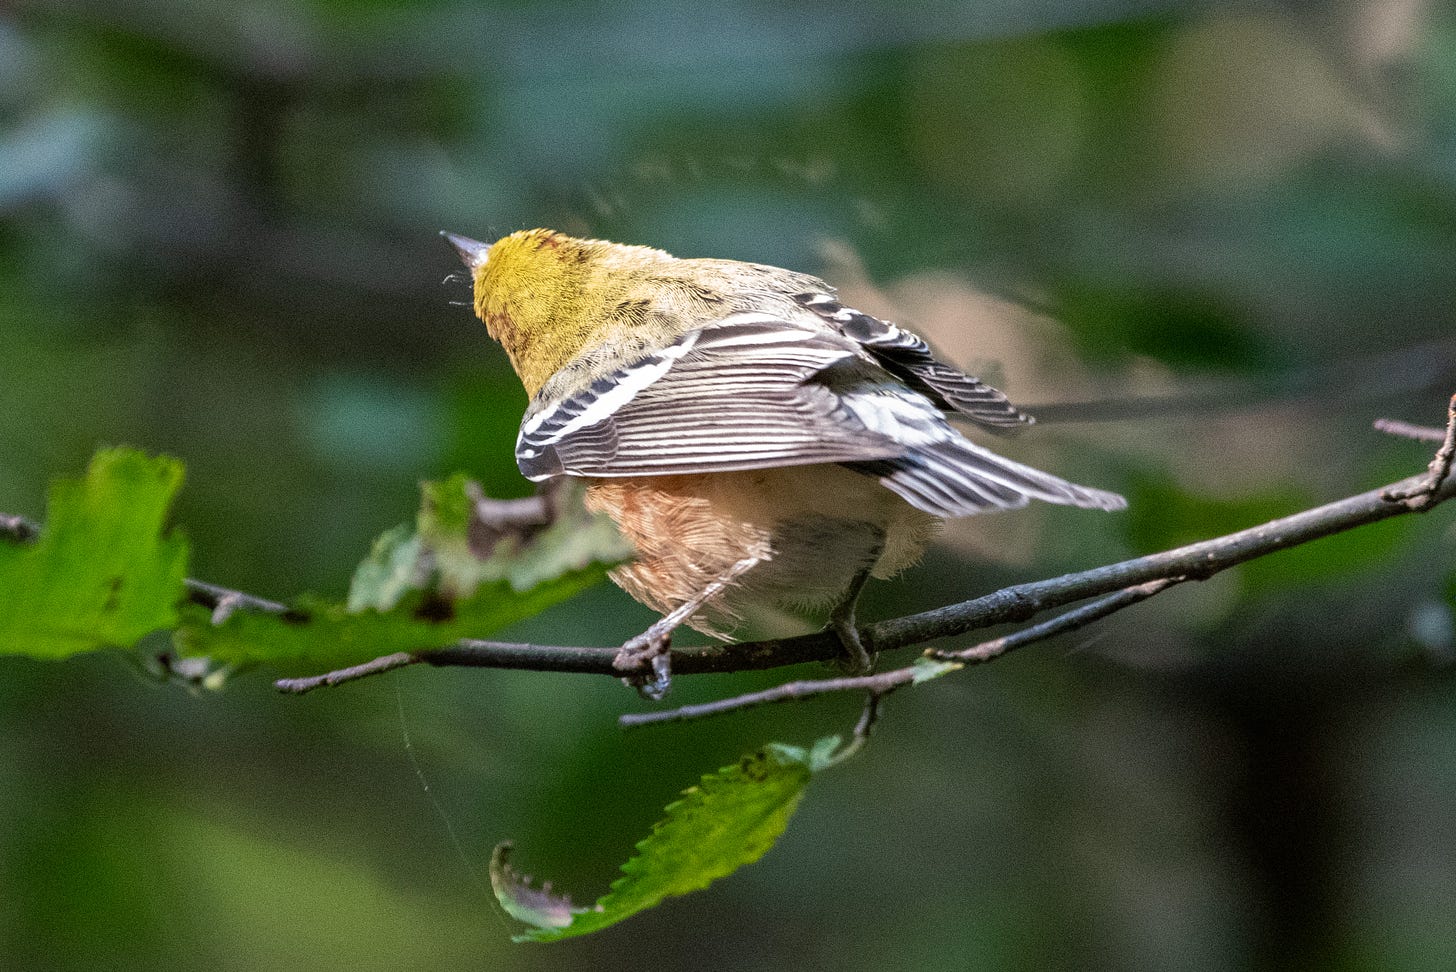 Seen from behind, a small but portly bird with a chartreuse cap, bright wingbars on black wings, and crimson flanks cocks its head